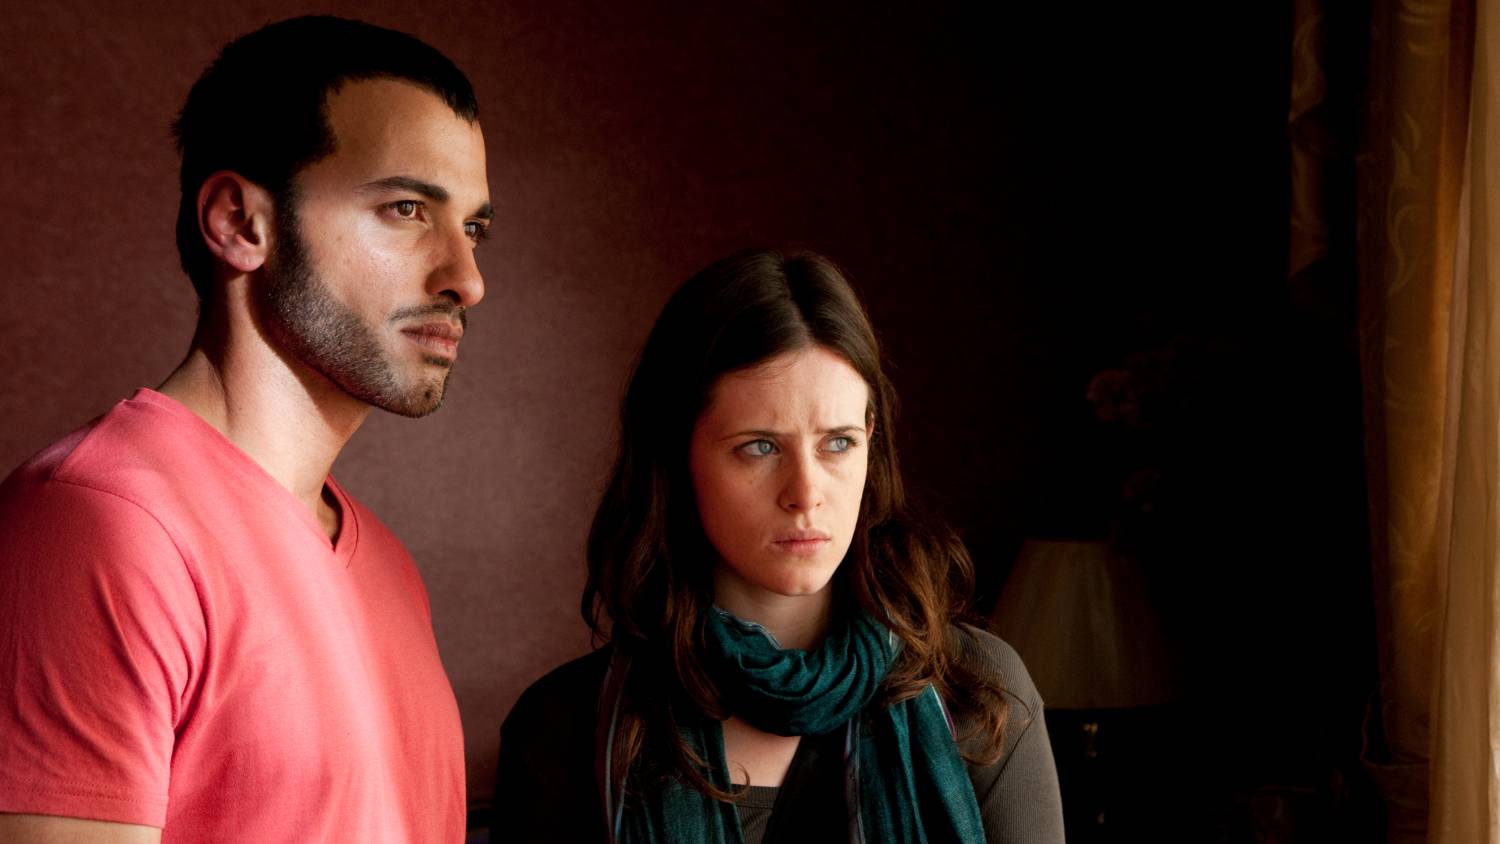 Haaz Sleiman (L) plays the role of Omar, a Palestinian fighter turned peace activist (Channel 4)